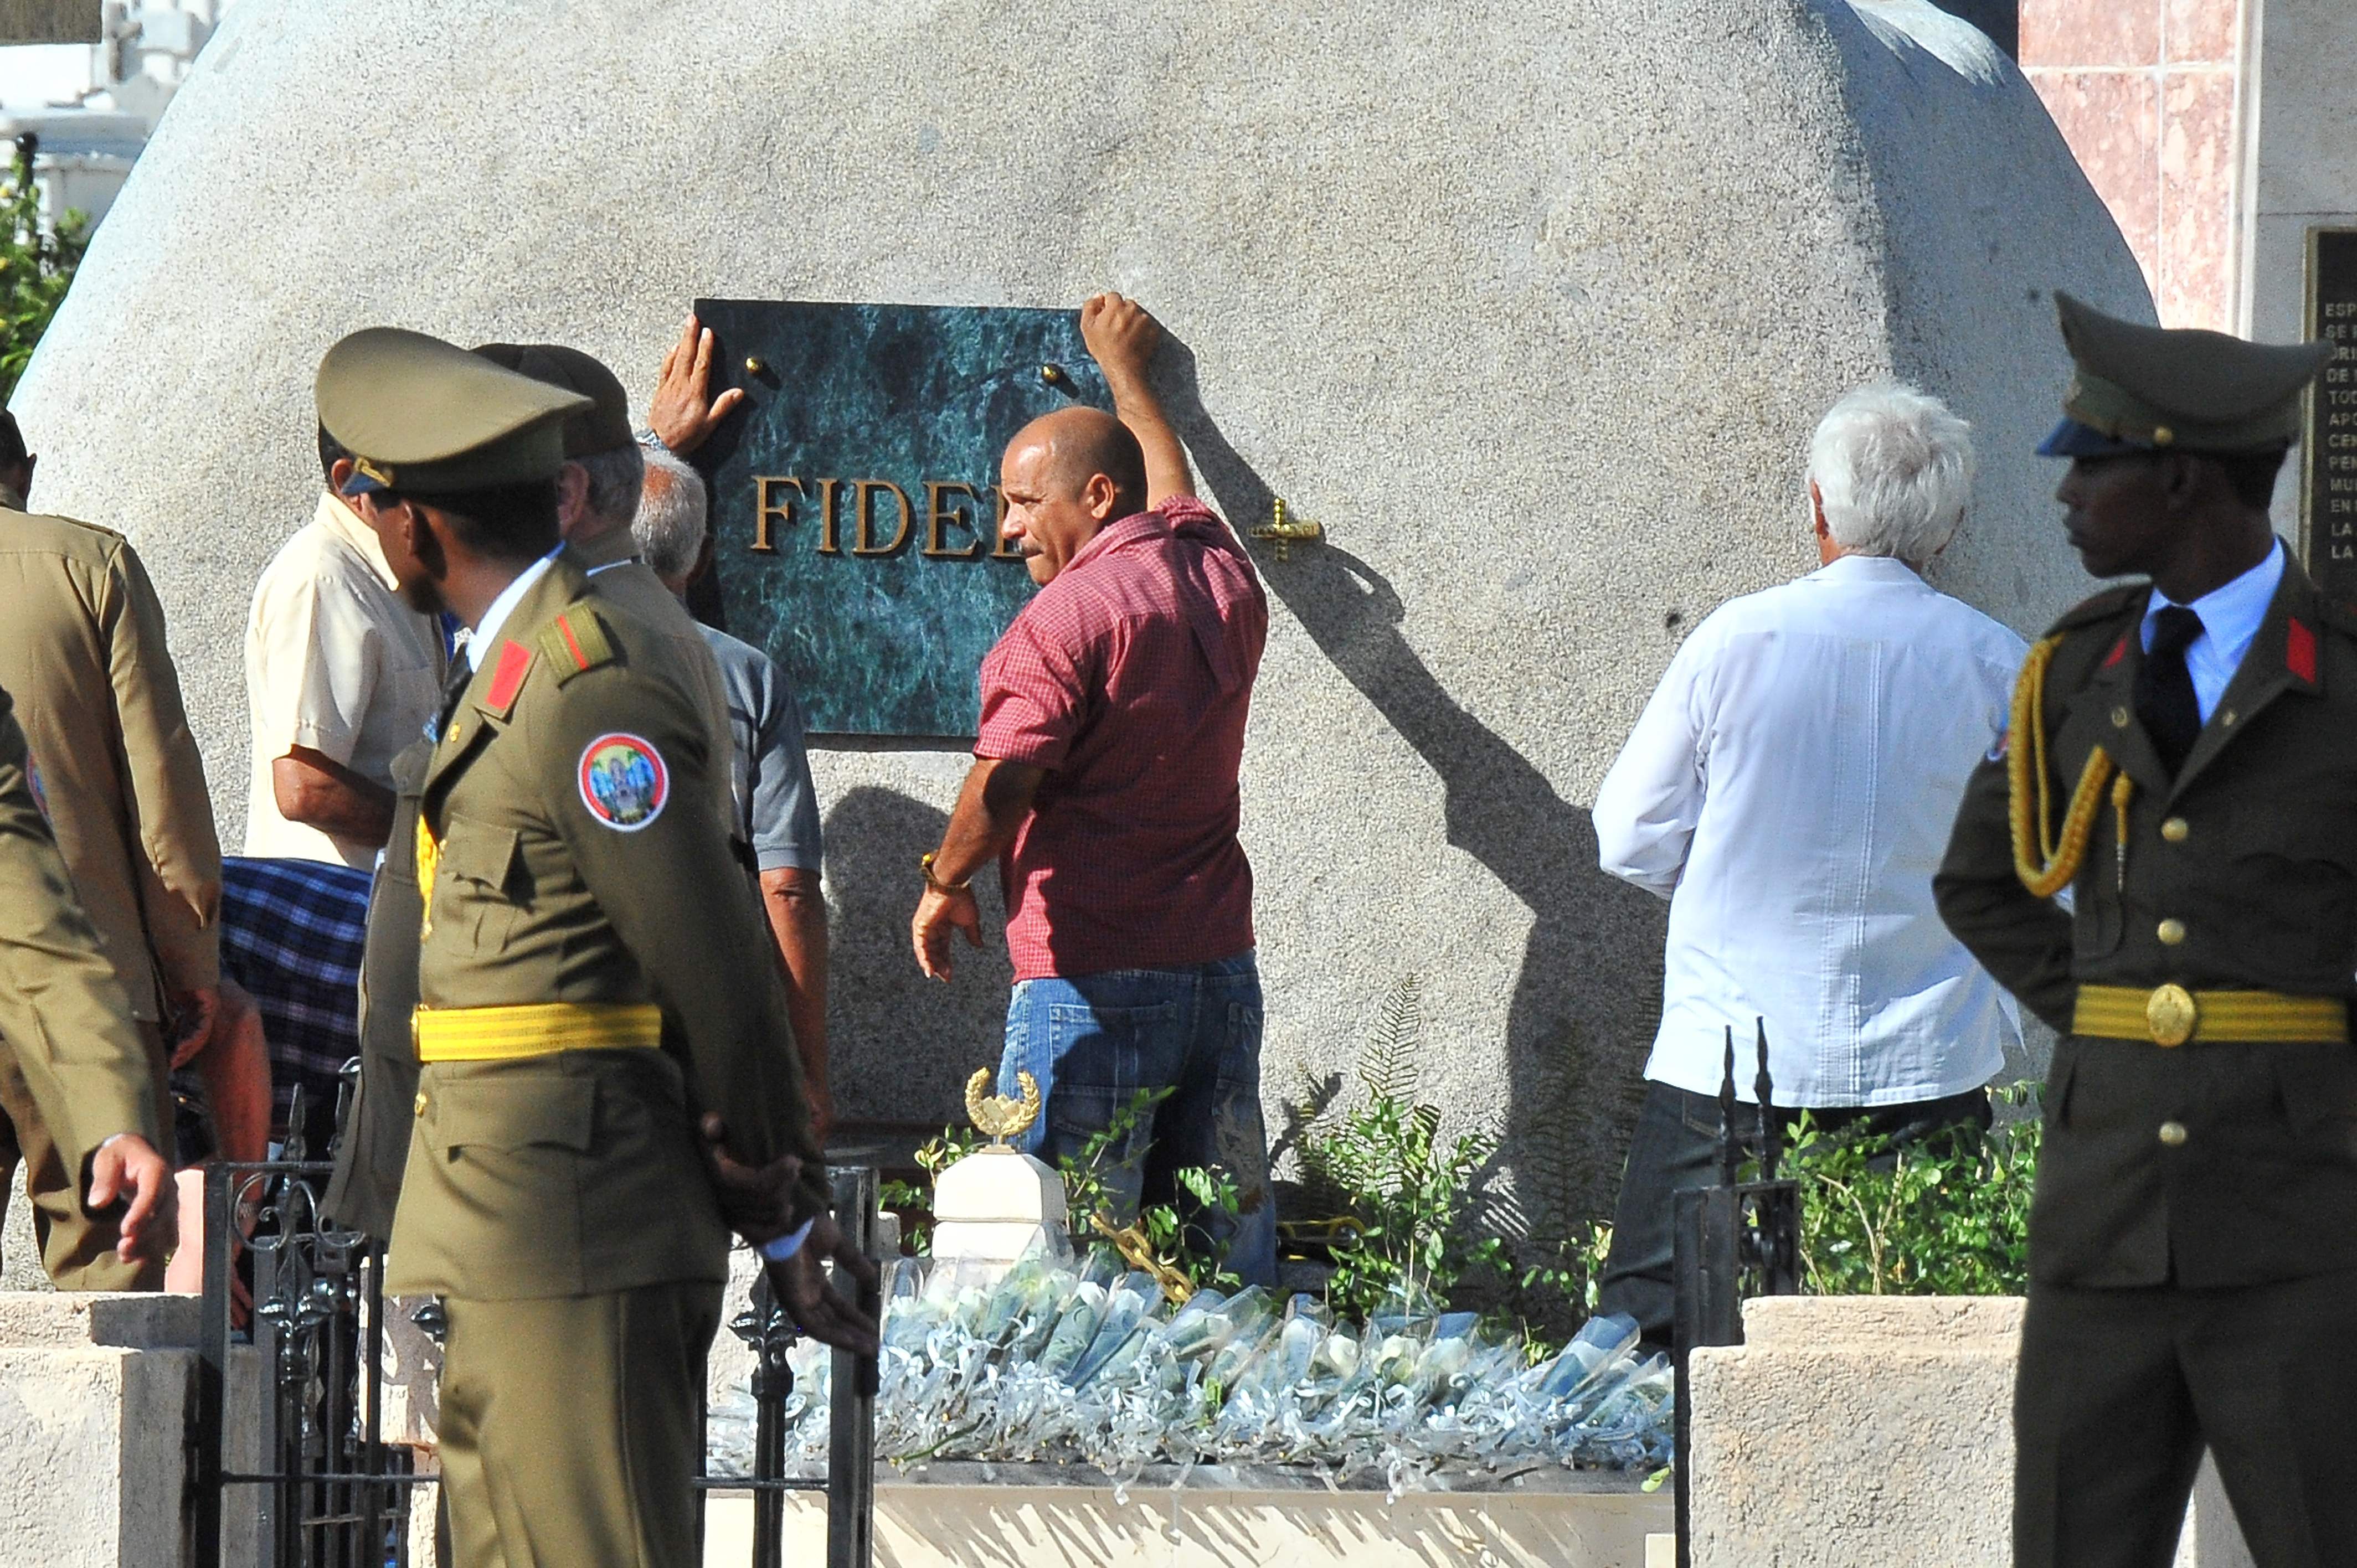 Fidel Castro laid to rest ending nine days of mourning